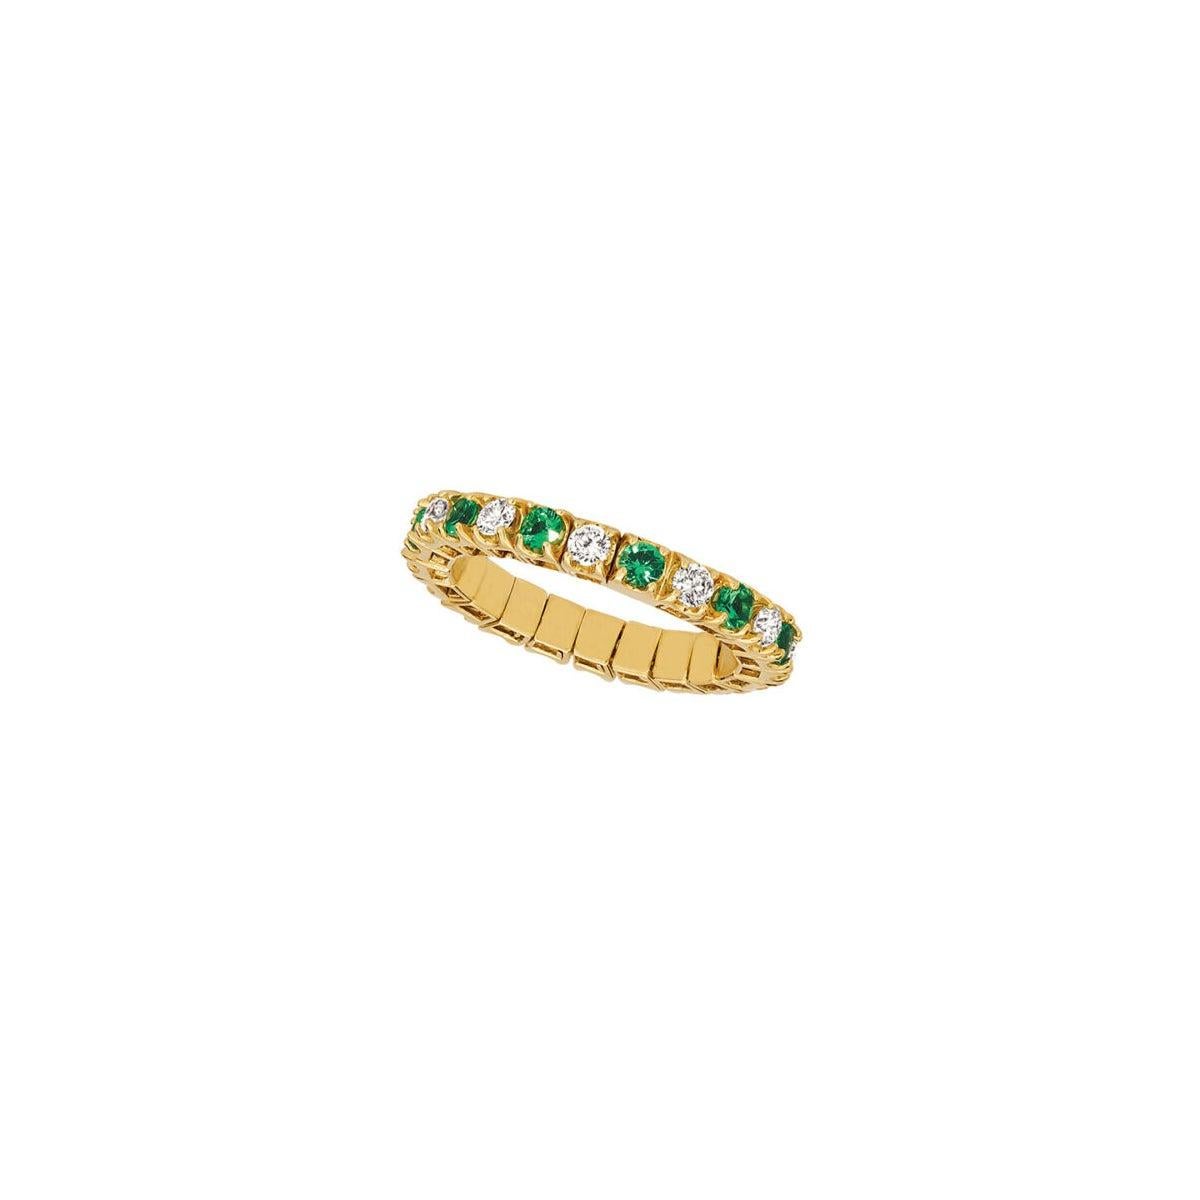 For Sale:  1.55 Carat Natural Diamond & Emerald Stretch Eternity Band Ring 14k Yellow Gold 4